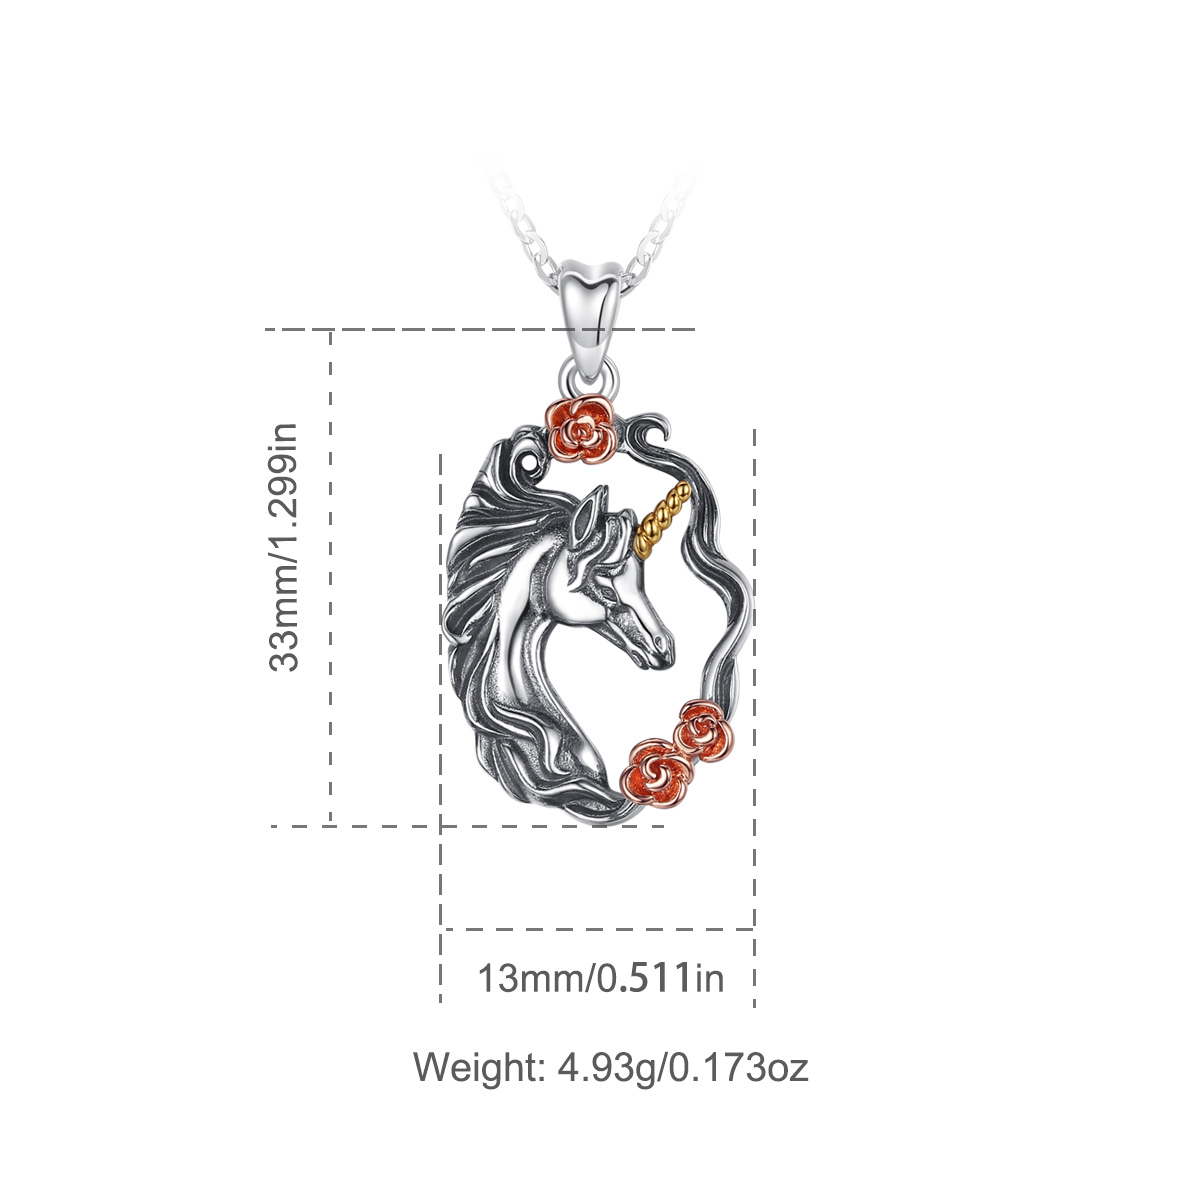 Merryshine Jewelry Vintage Style S925 Sterling Silver Unicorn Pendant Necklace for Girls